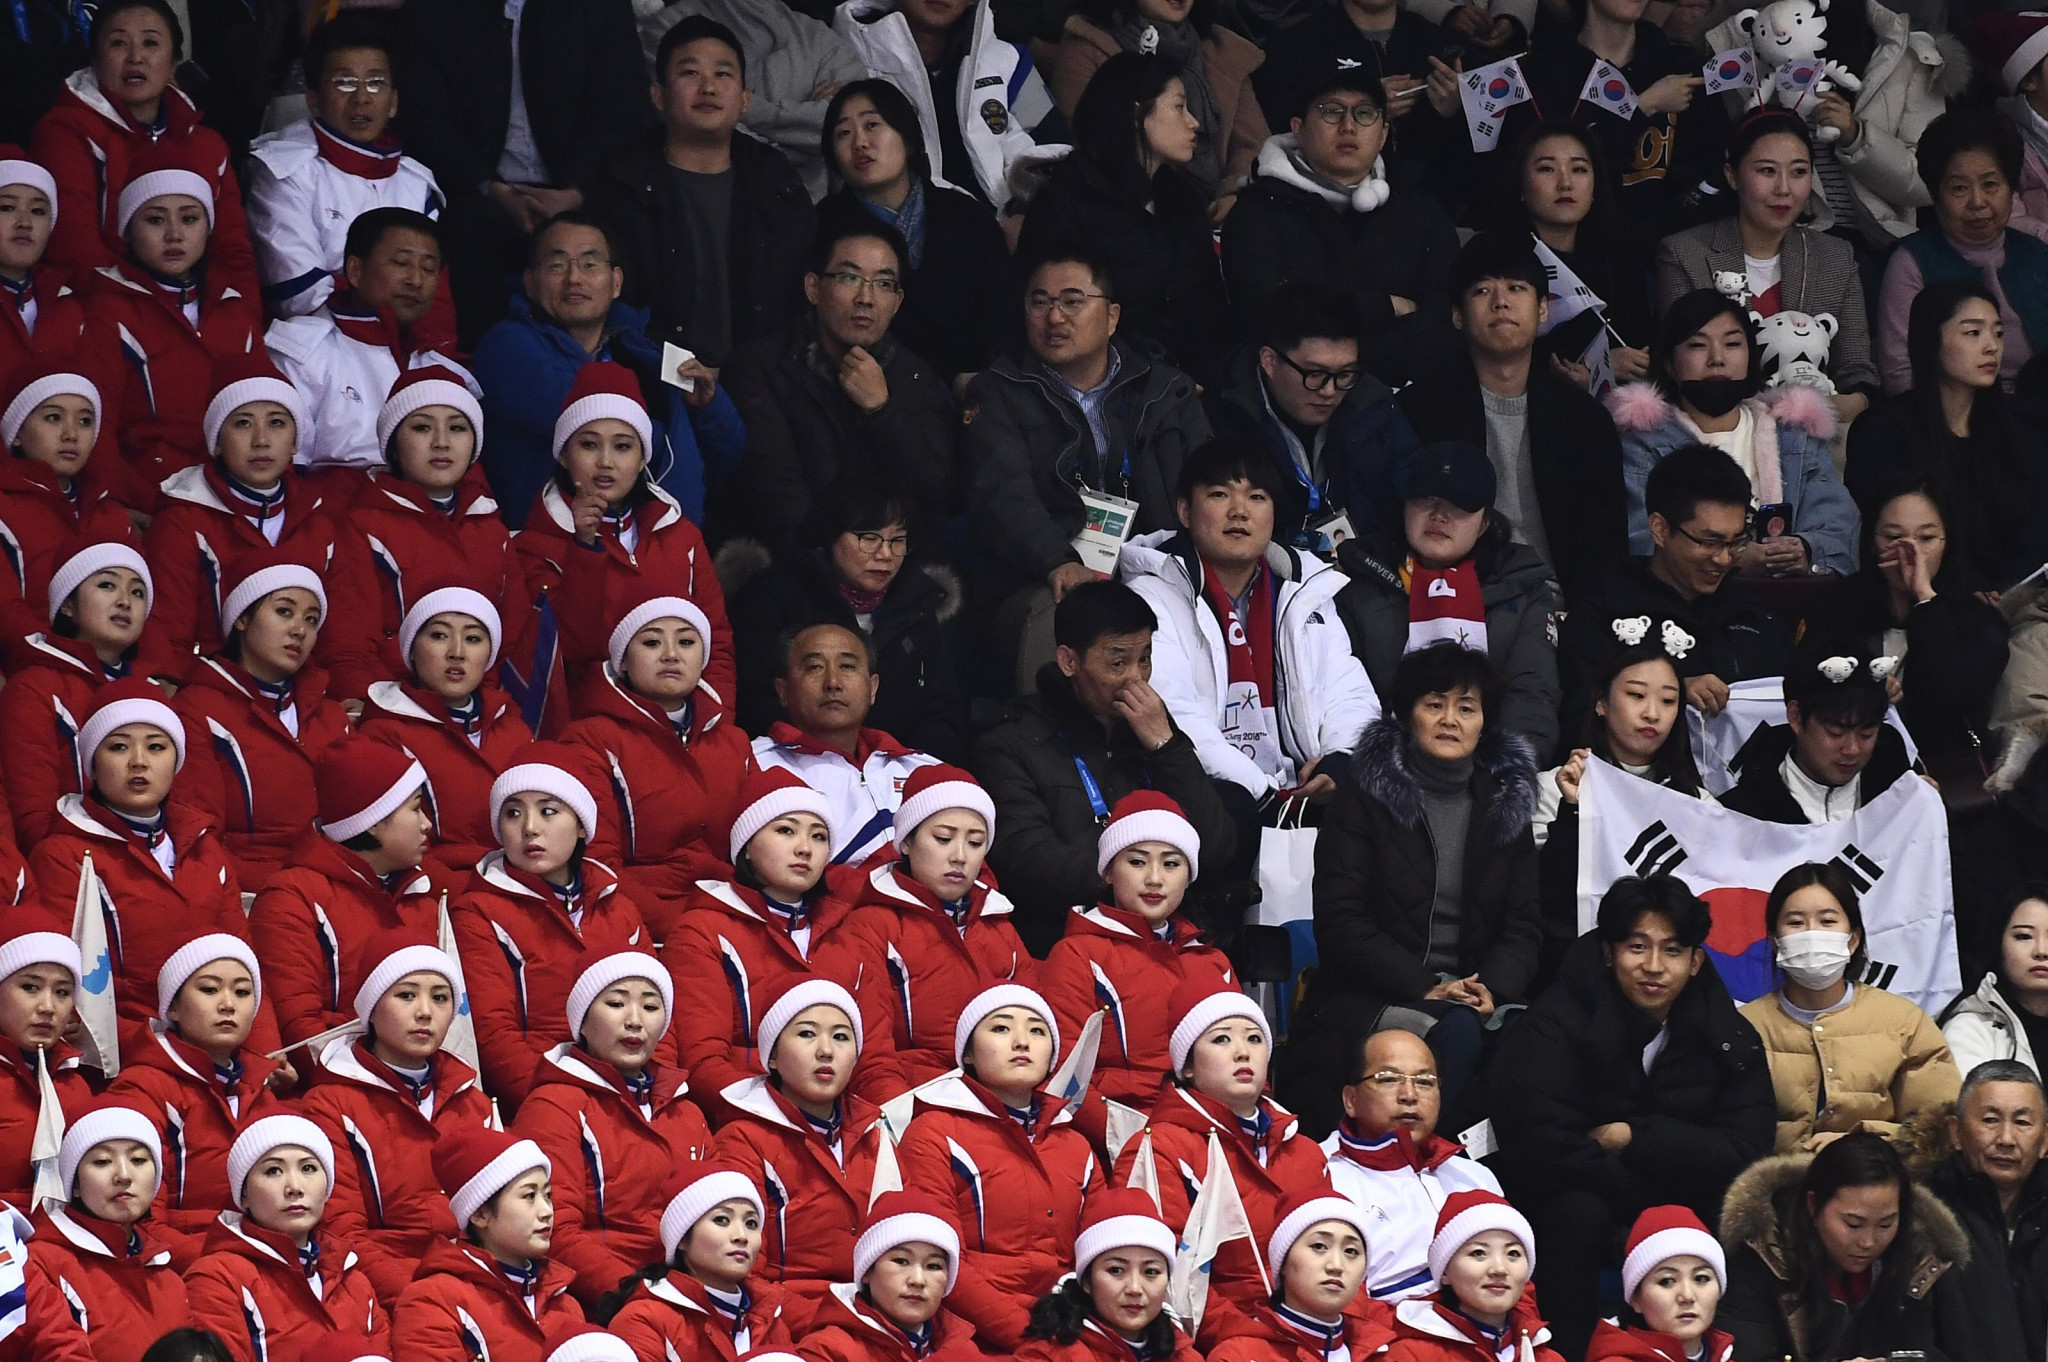 North Korean cheerleaders pictured attending Pyeongchang 2018 ©Getty Images